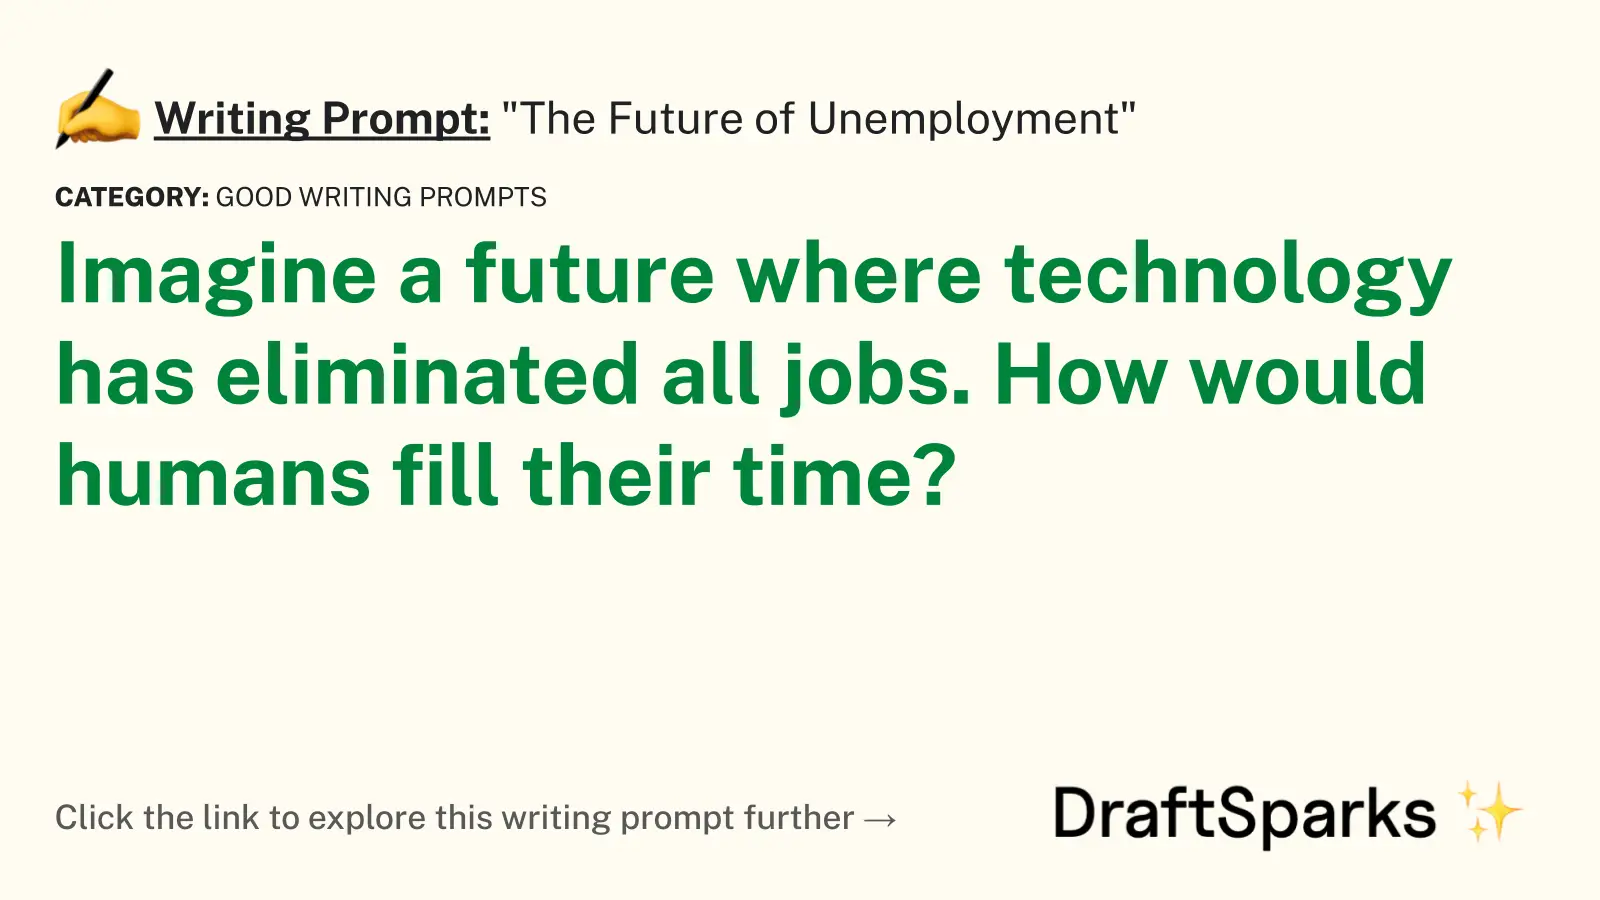 “The Future of Unemployment”